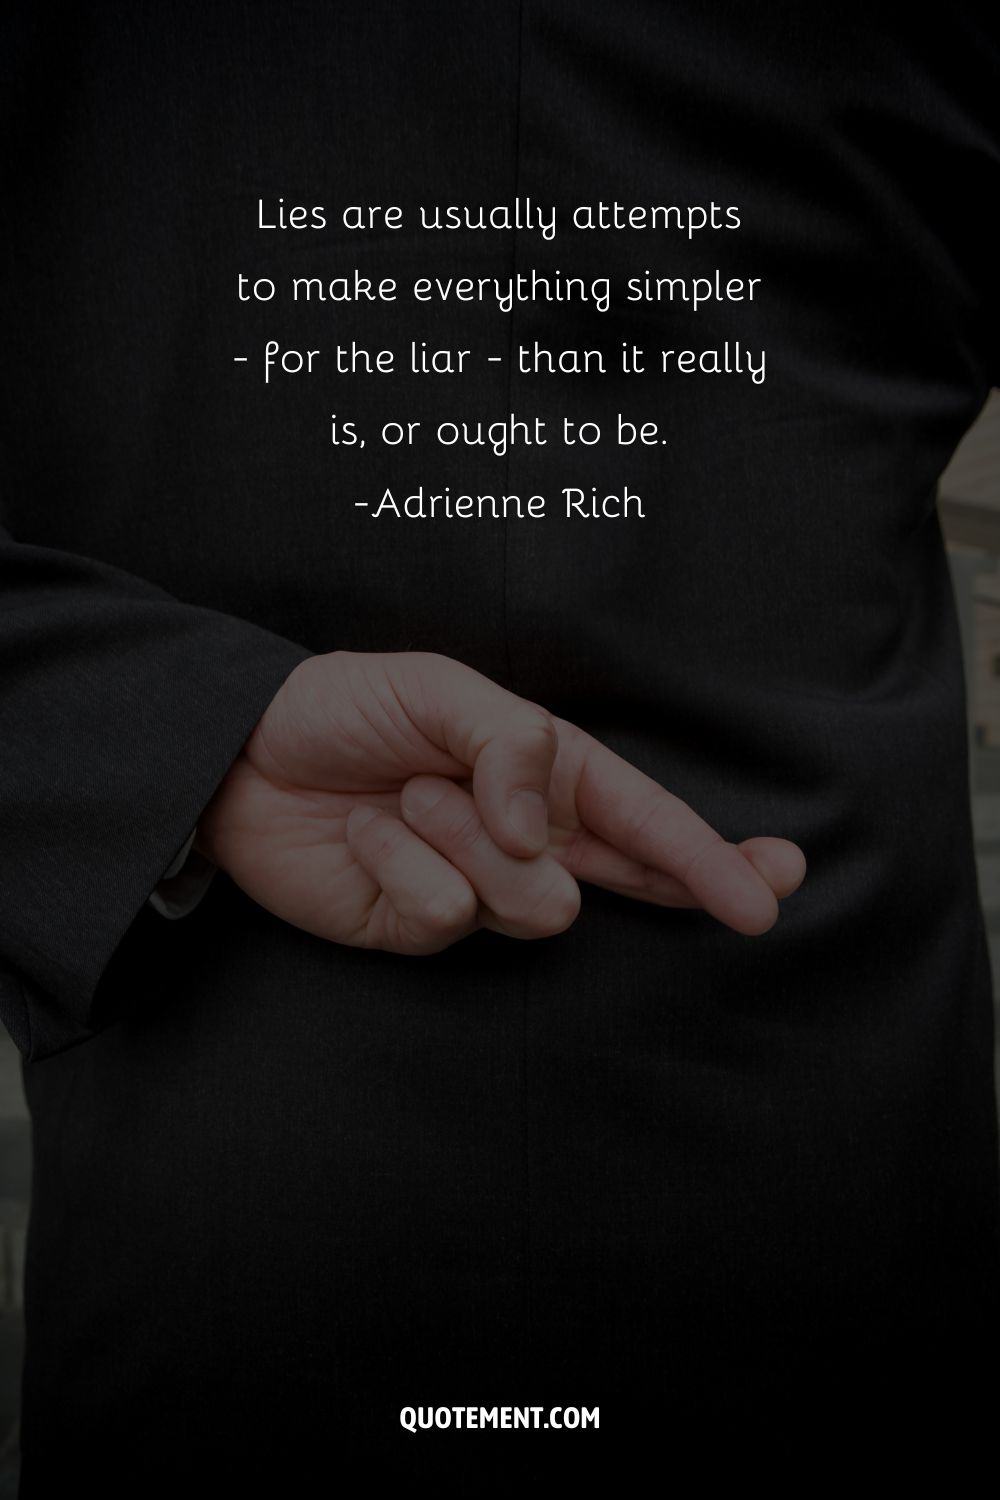 crossed fingers image representing top quote about liars
